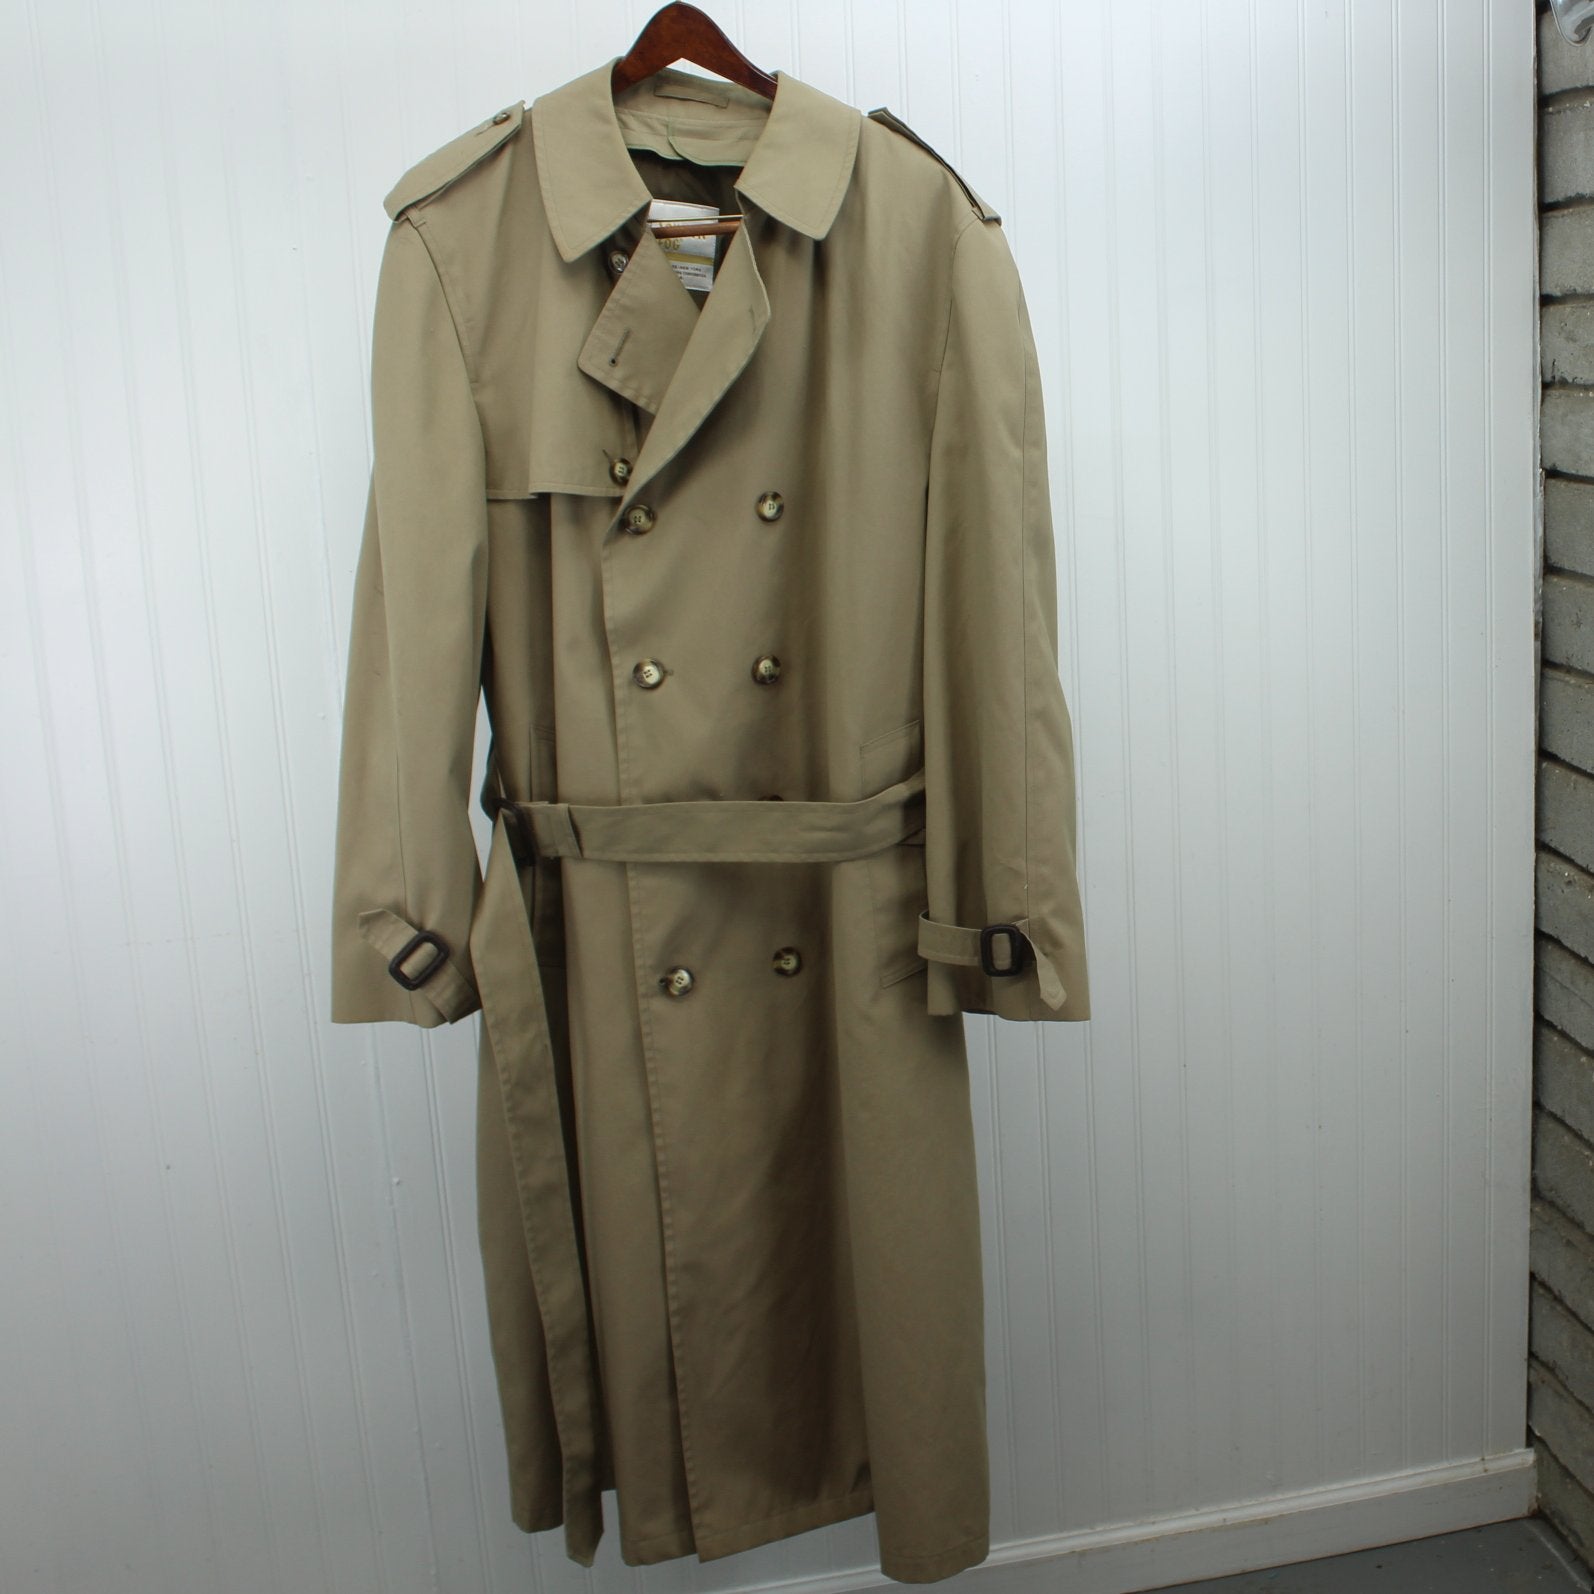 London Fog Trench Coat Men's 46L Dbl Breast Removable Thinsulate Lining full front view